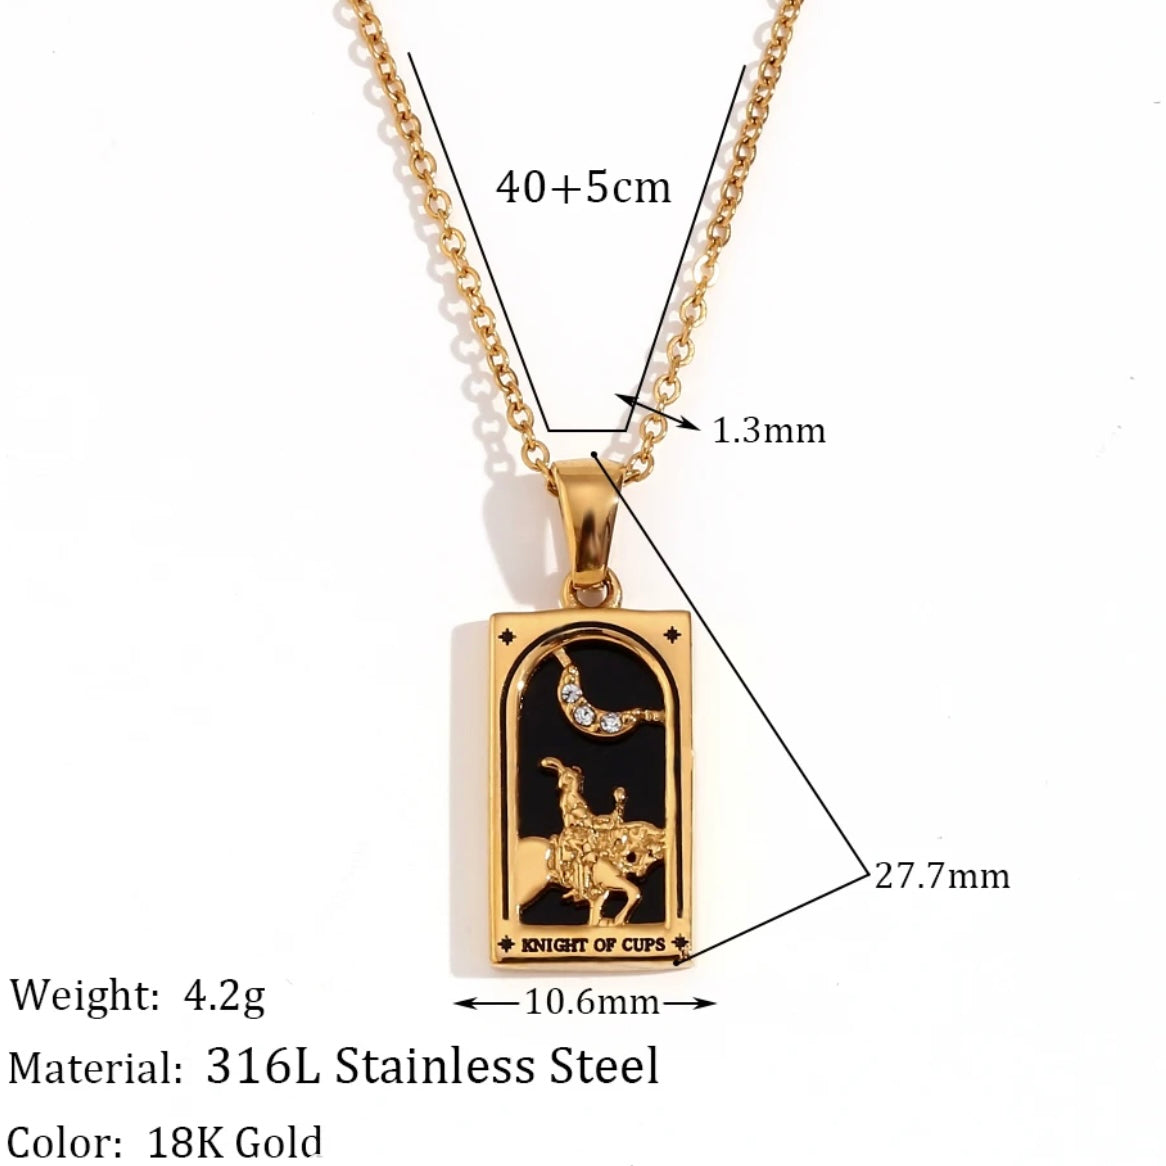 18k Gold Plated Tarot Card Necklace - The Moon